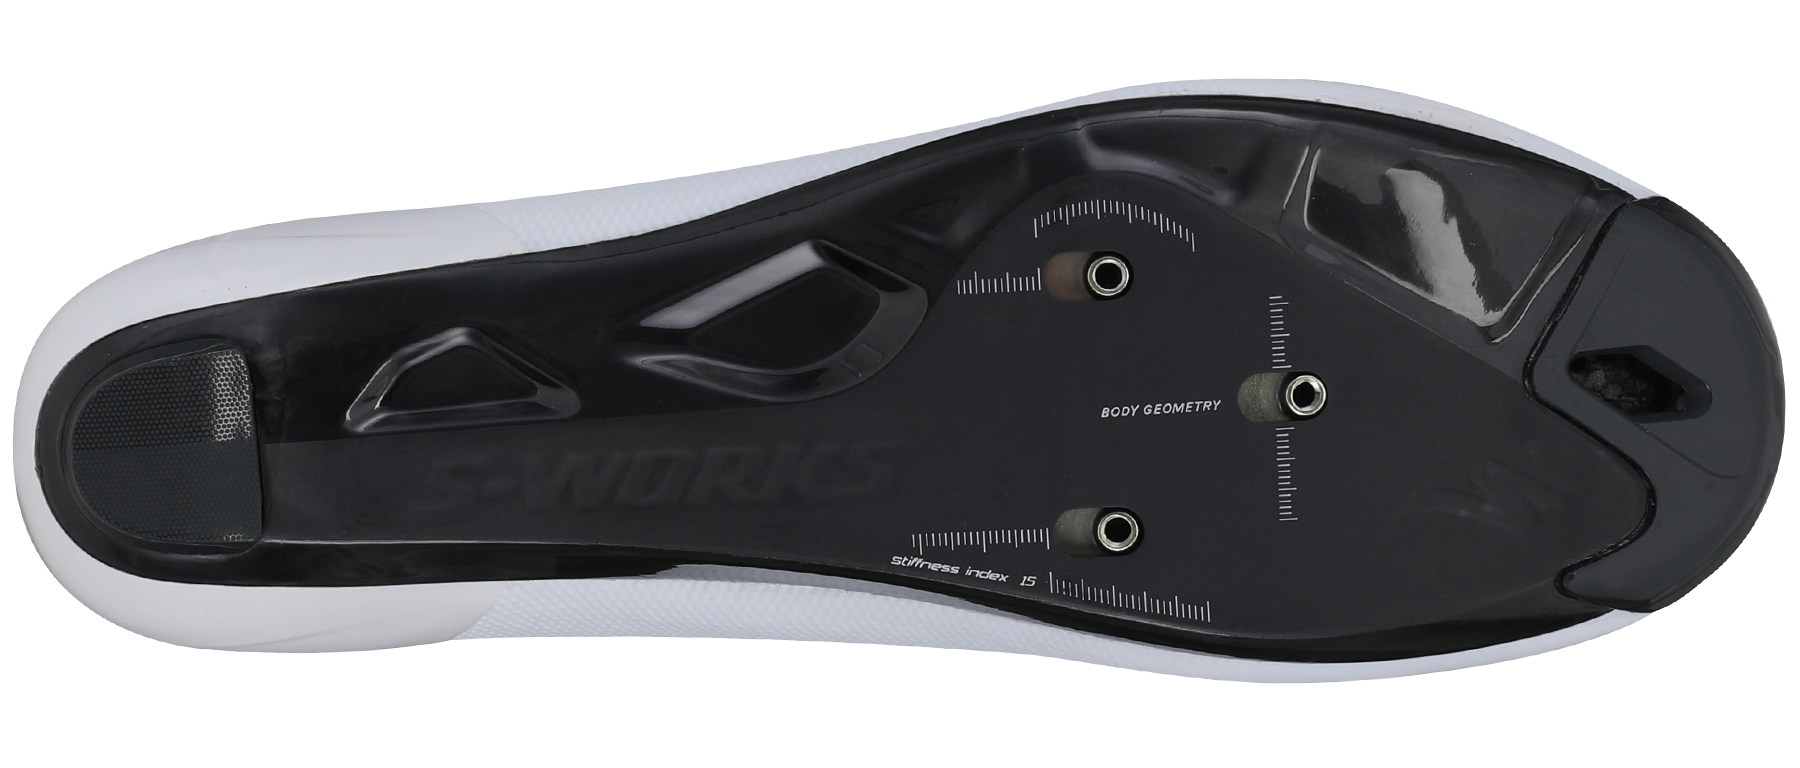 Specialized S-Works 7 Lace Road Shoe